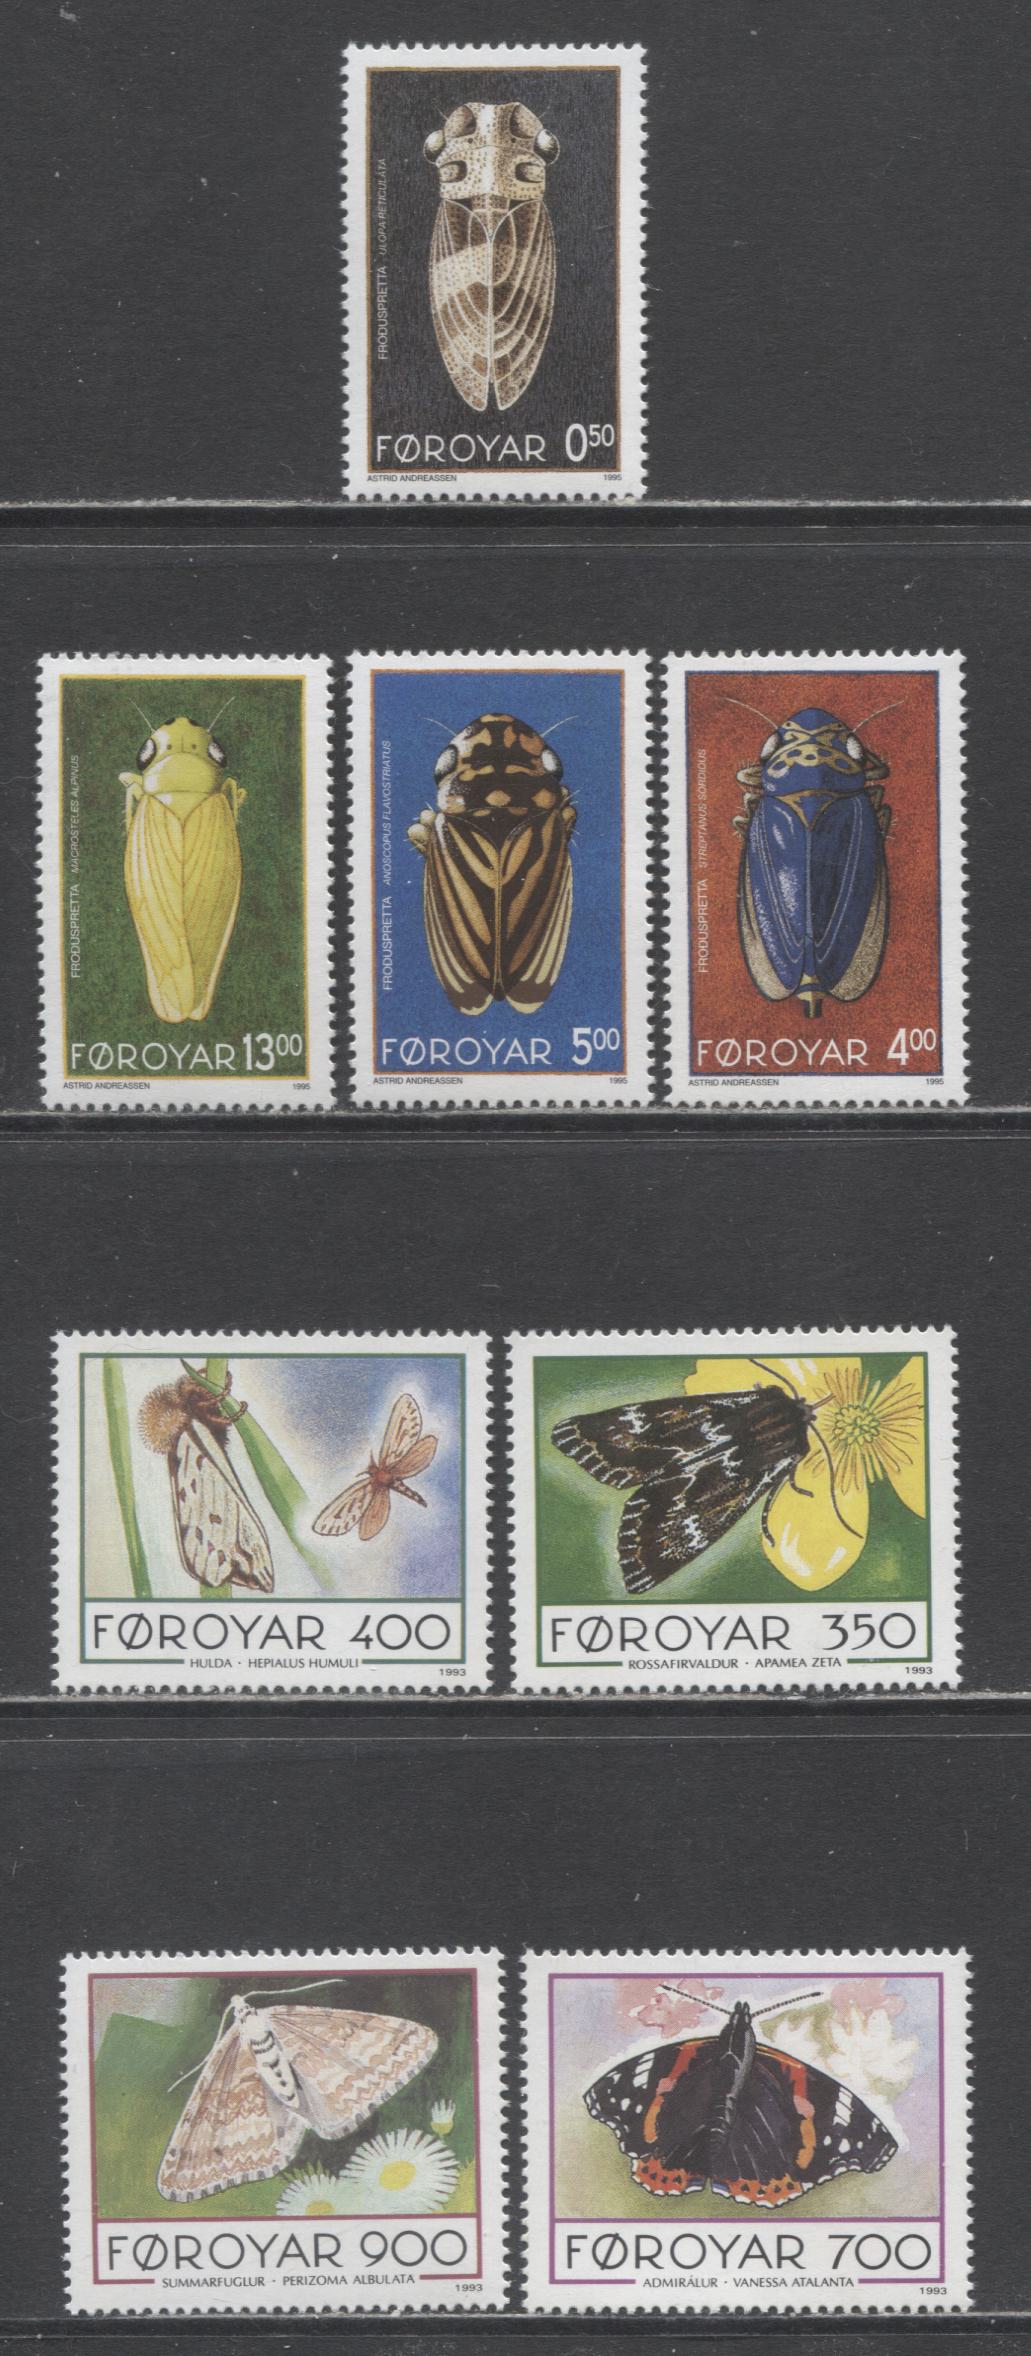 Lot 178 Faroe Islands SC#256/279 1993-1995 Butterflies & Leafhopper Issues, 8 VFNH Singles, Click on Listing to See ALL Pictures, 2017 Scott Cat. $18.05